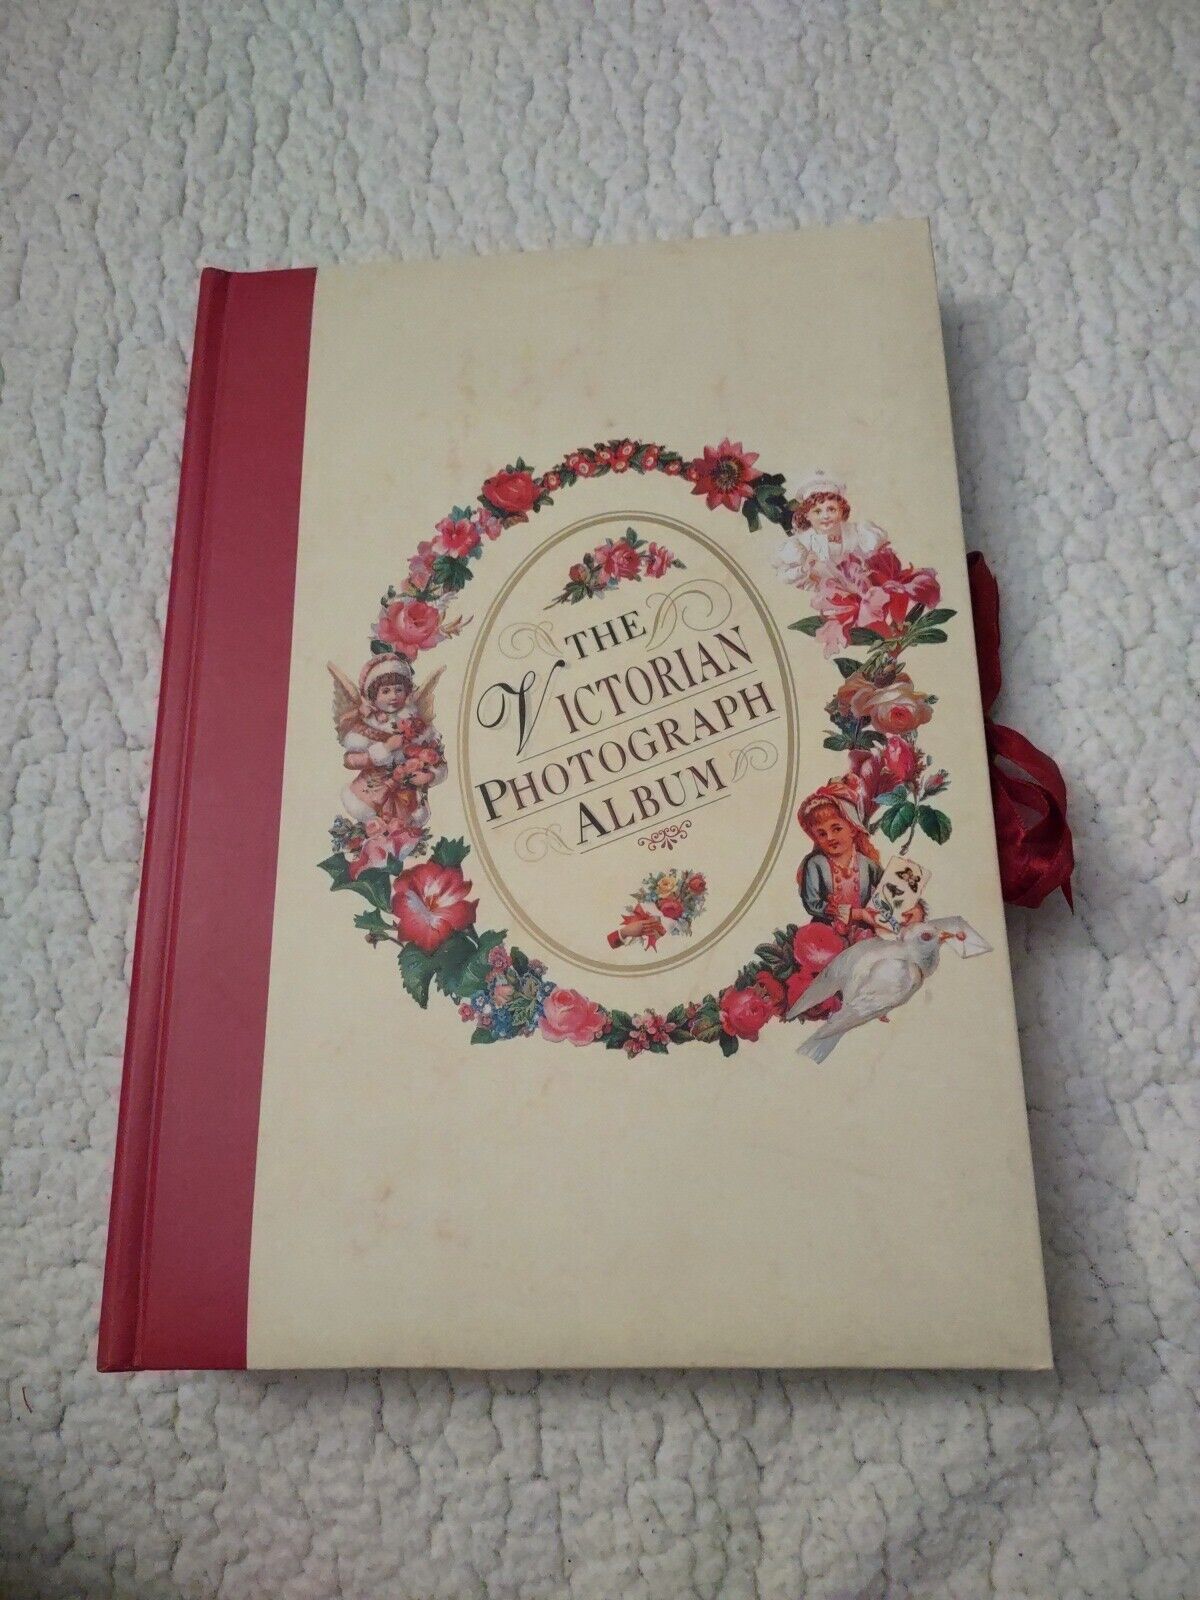 Blank Photo Album Called The Victorian Photograph Album For All Your Photos 